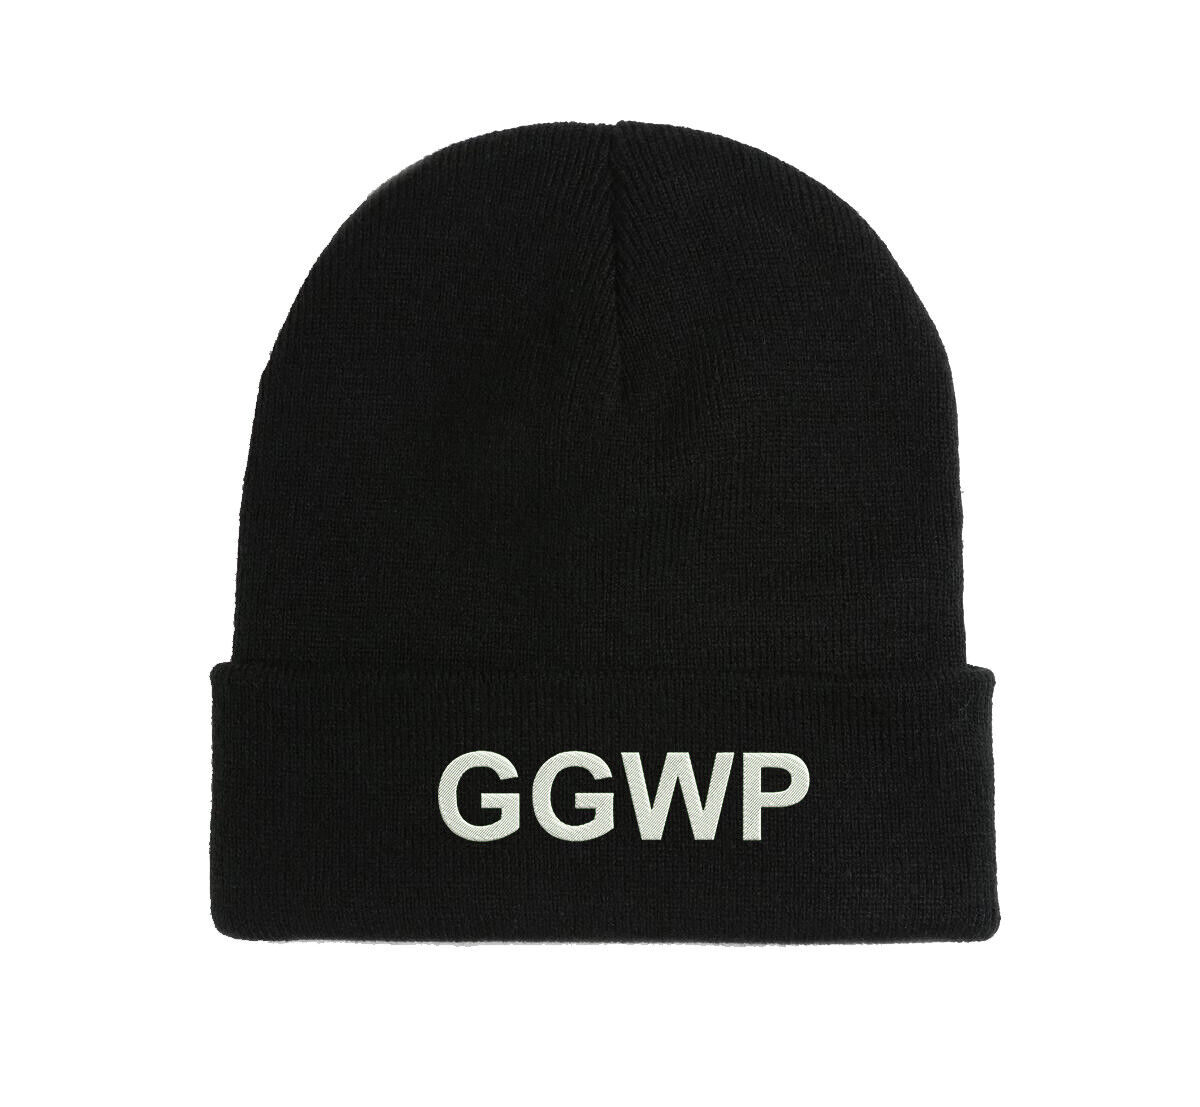 GGWP Good Game Well Played Embroidered Beanie Hat Cap Winter Fall Soft